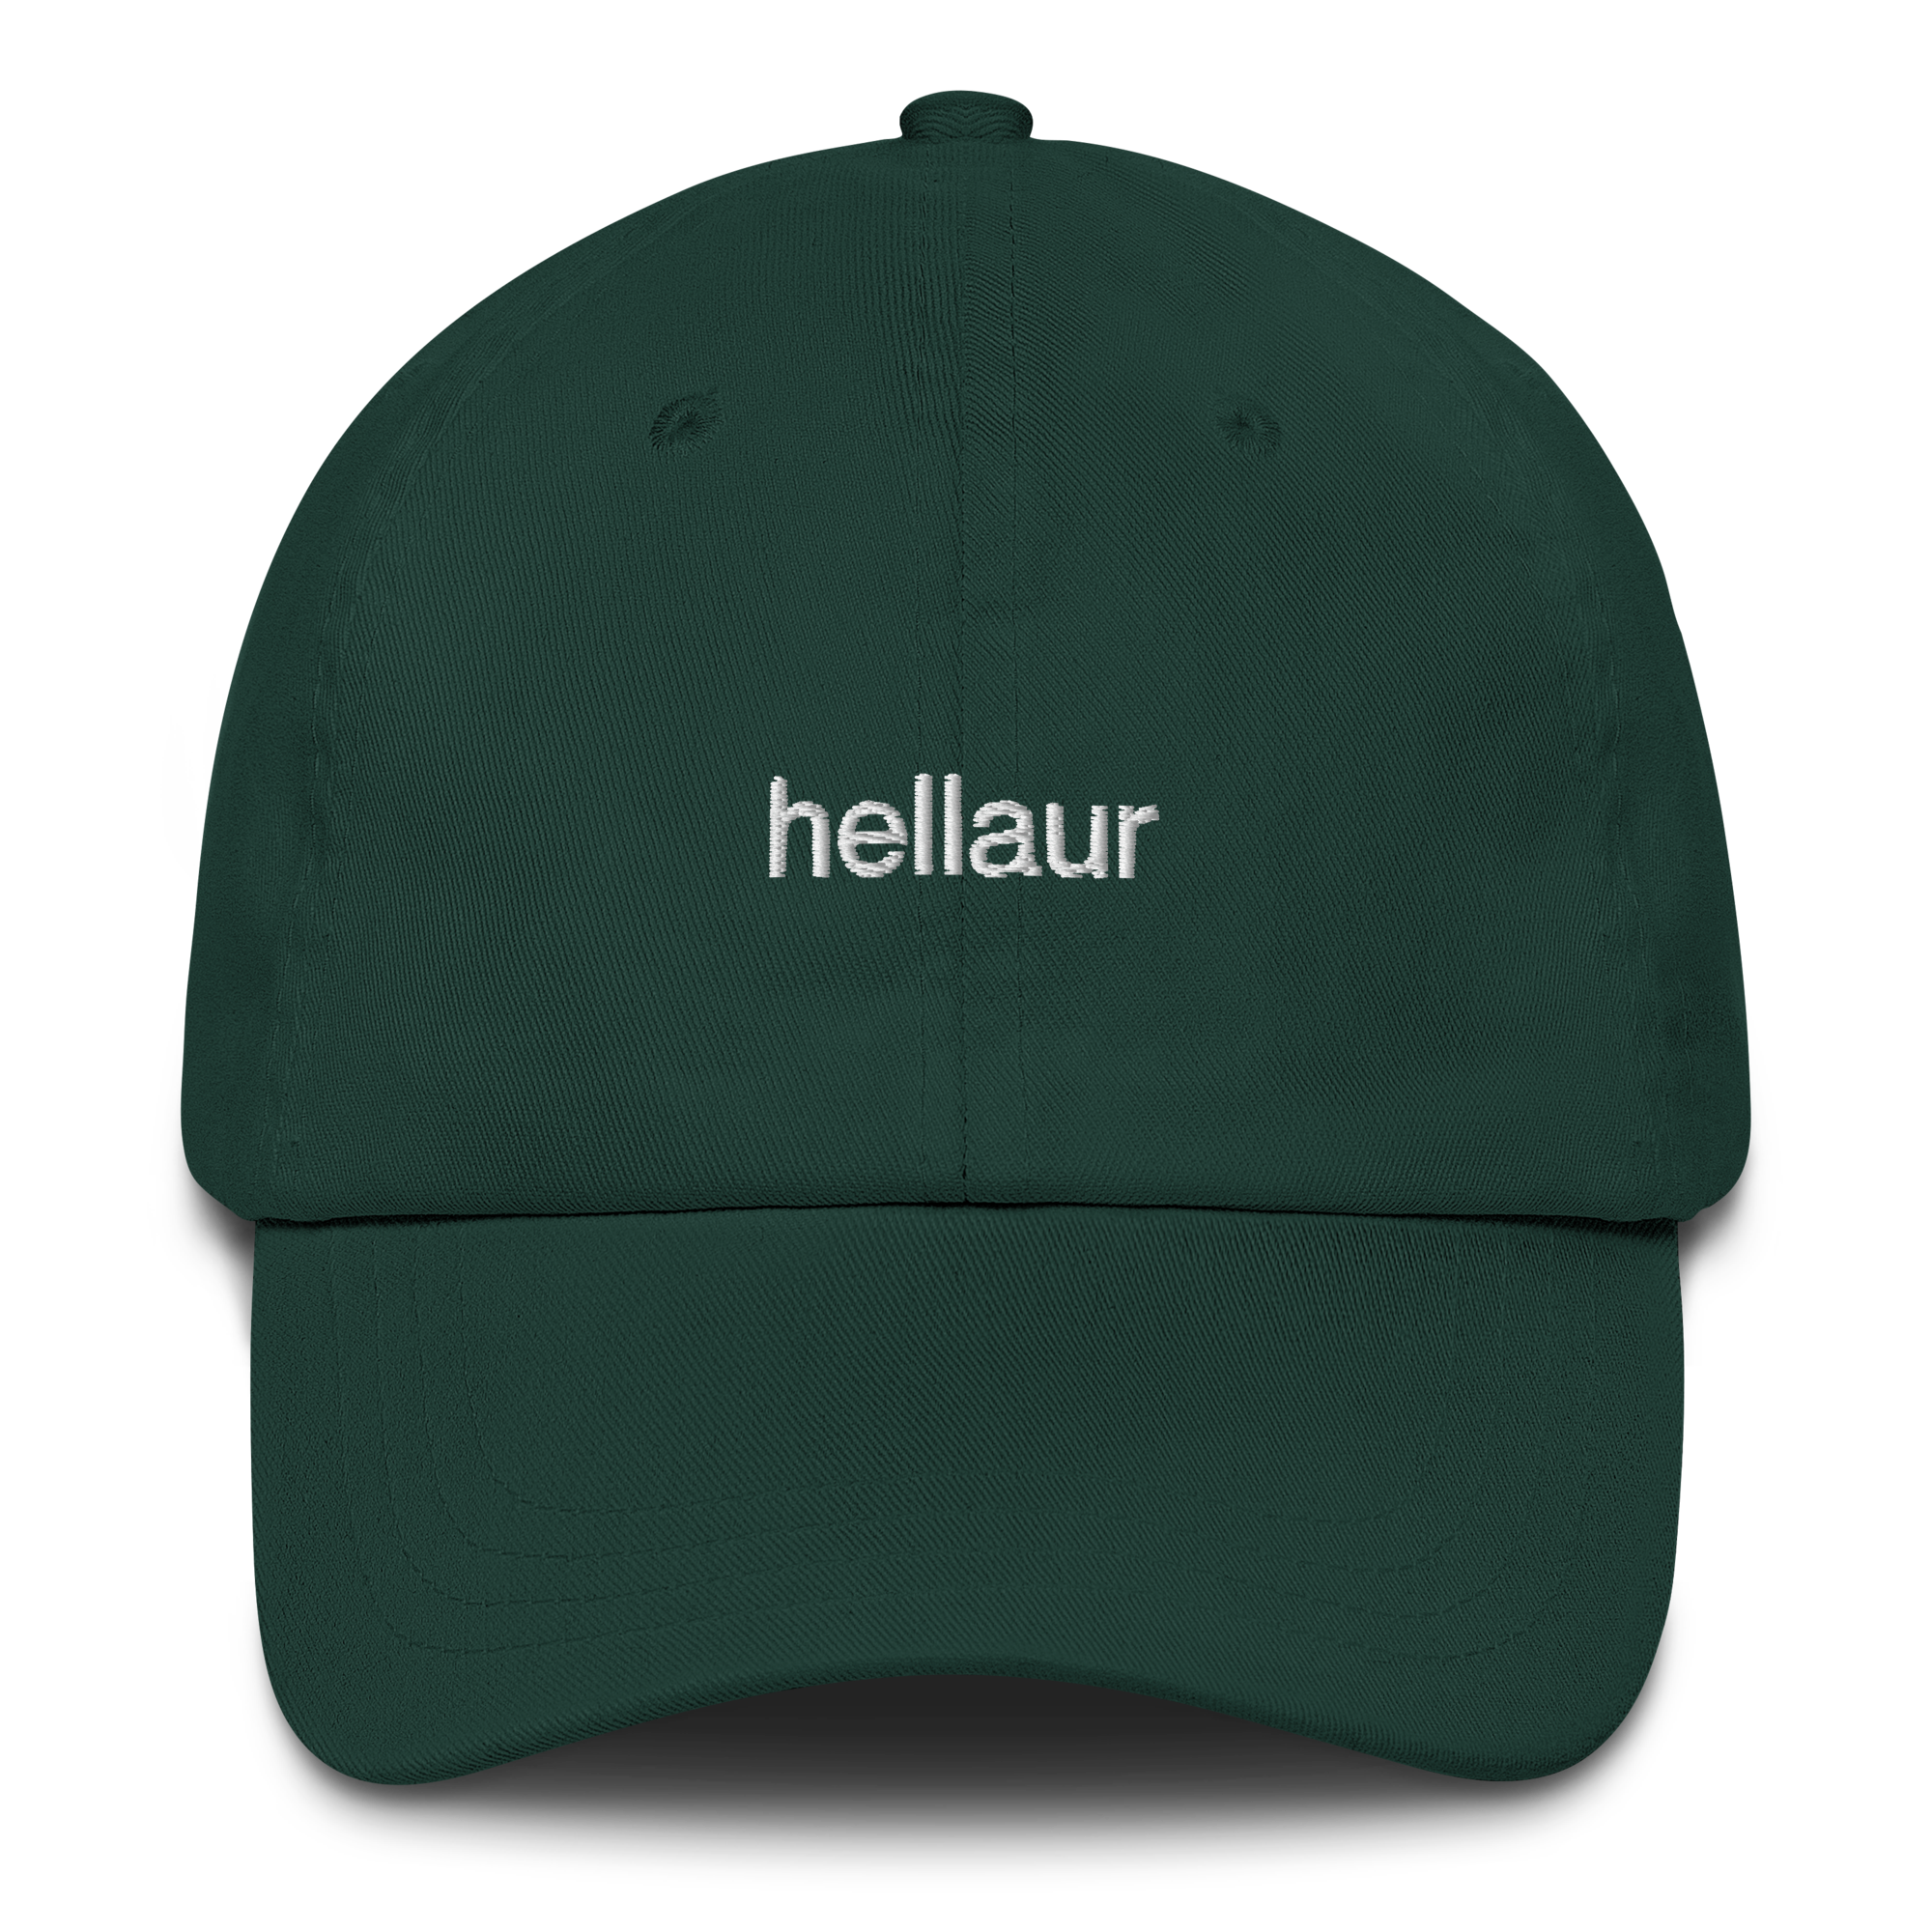 classic-dad-hat-spruce-front-667eec16a783a.png